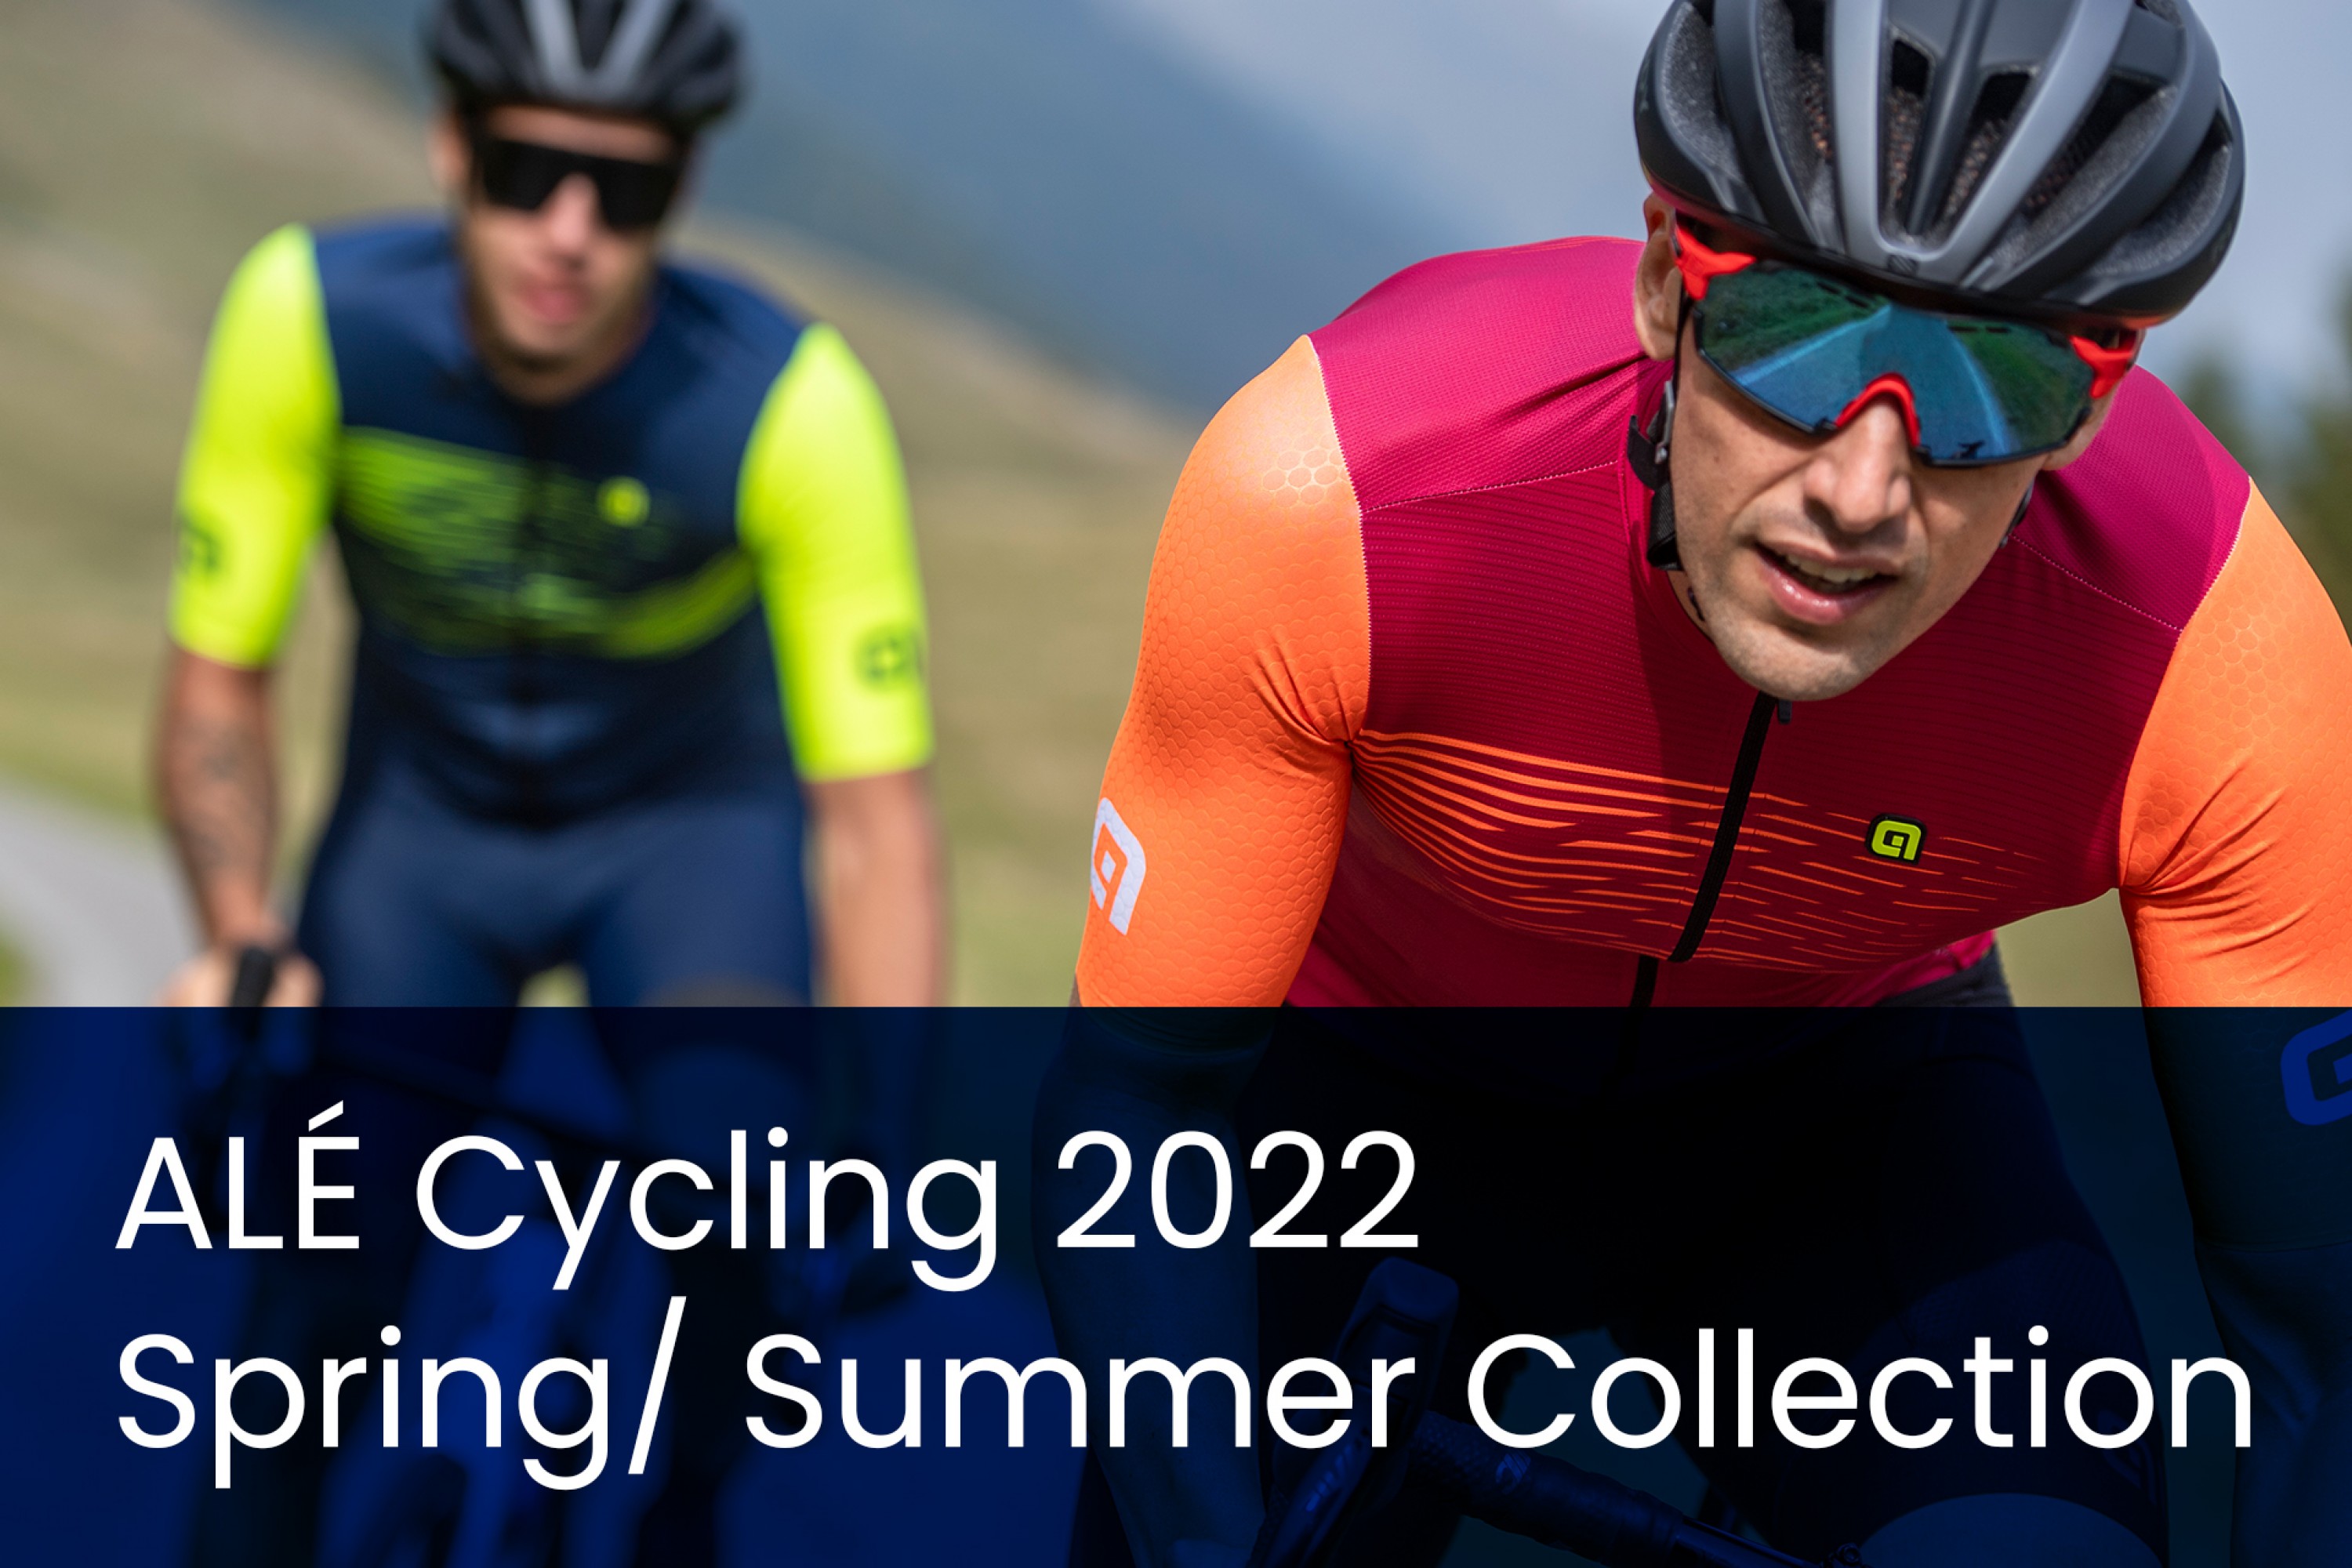 New Arrival: ALÉ Cycling 2022 Spring/ Summer Collection